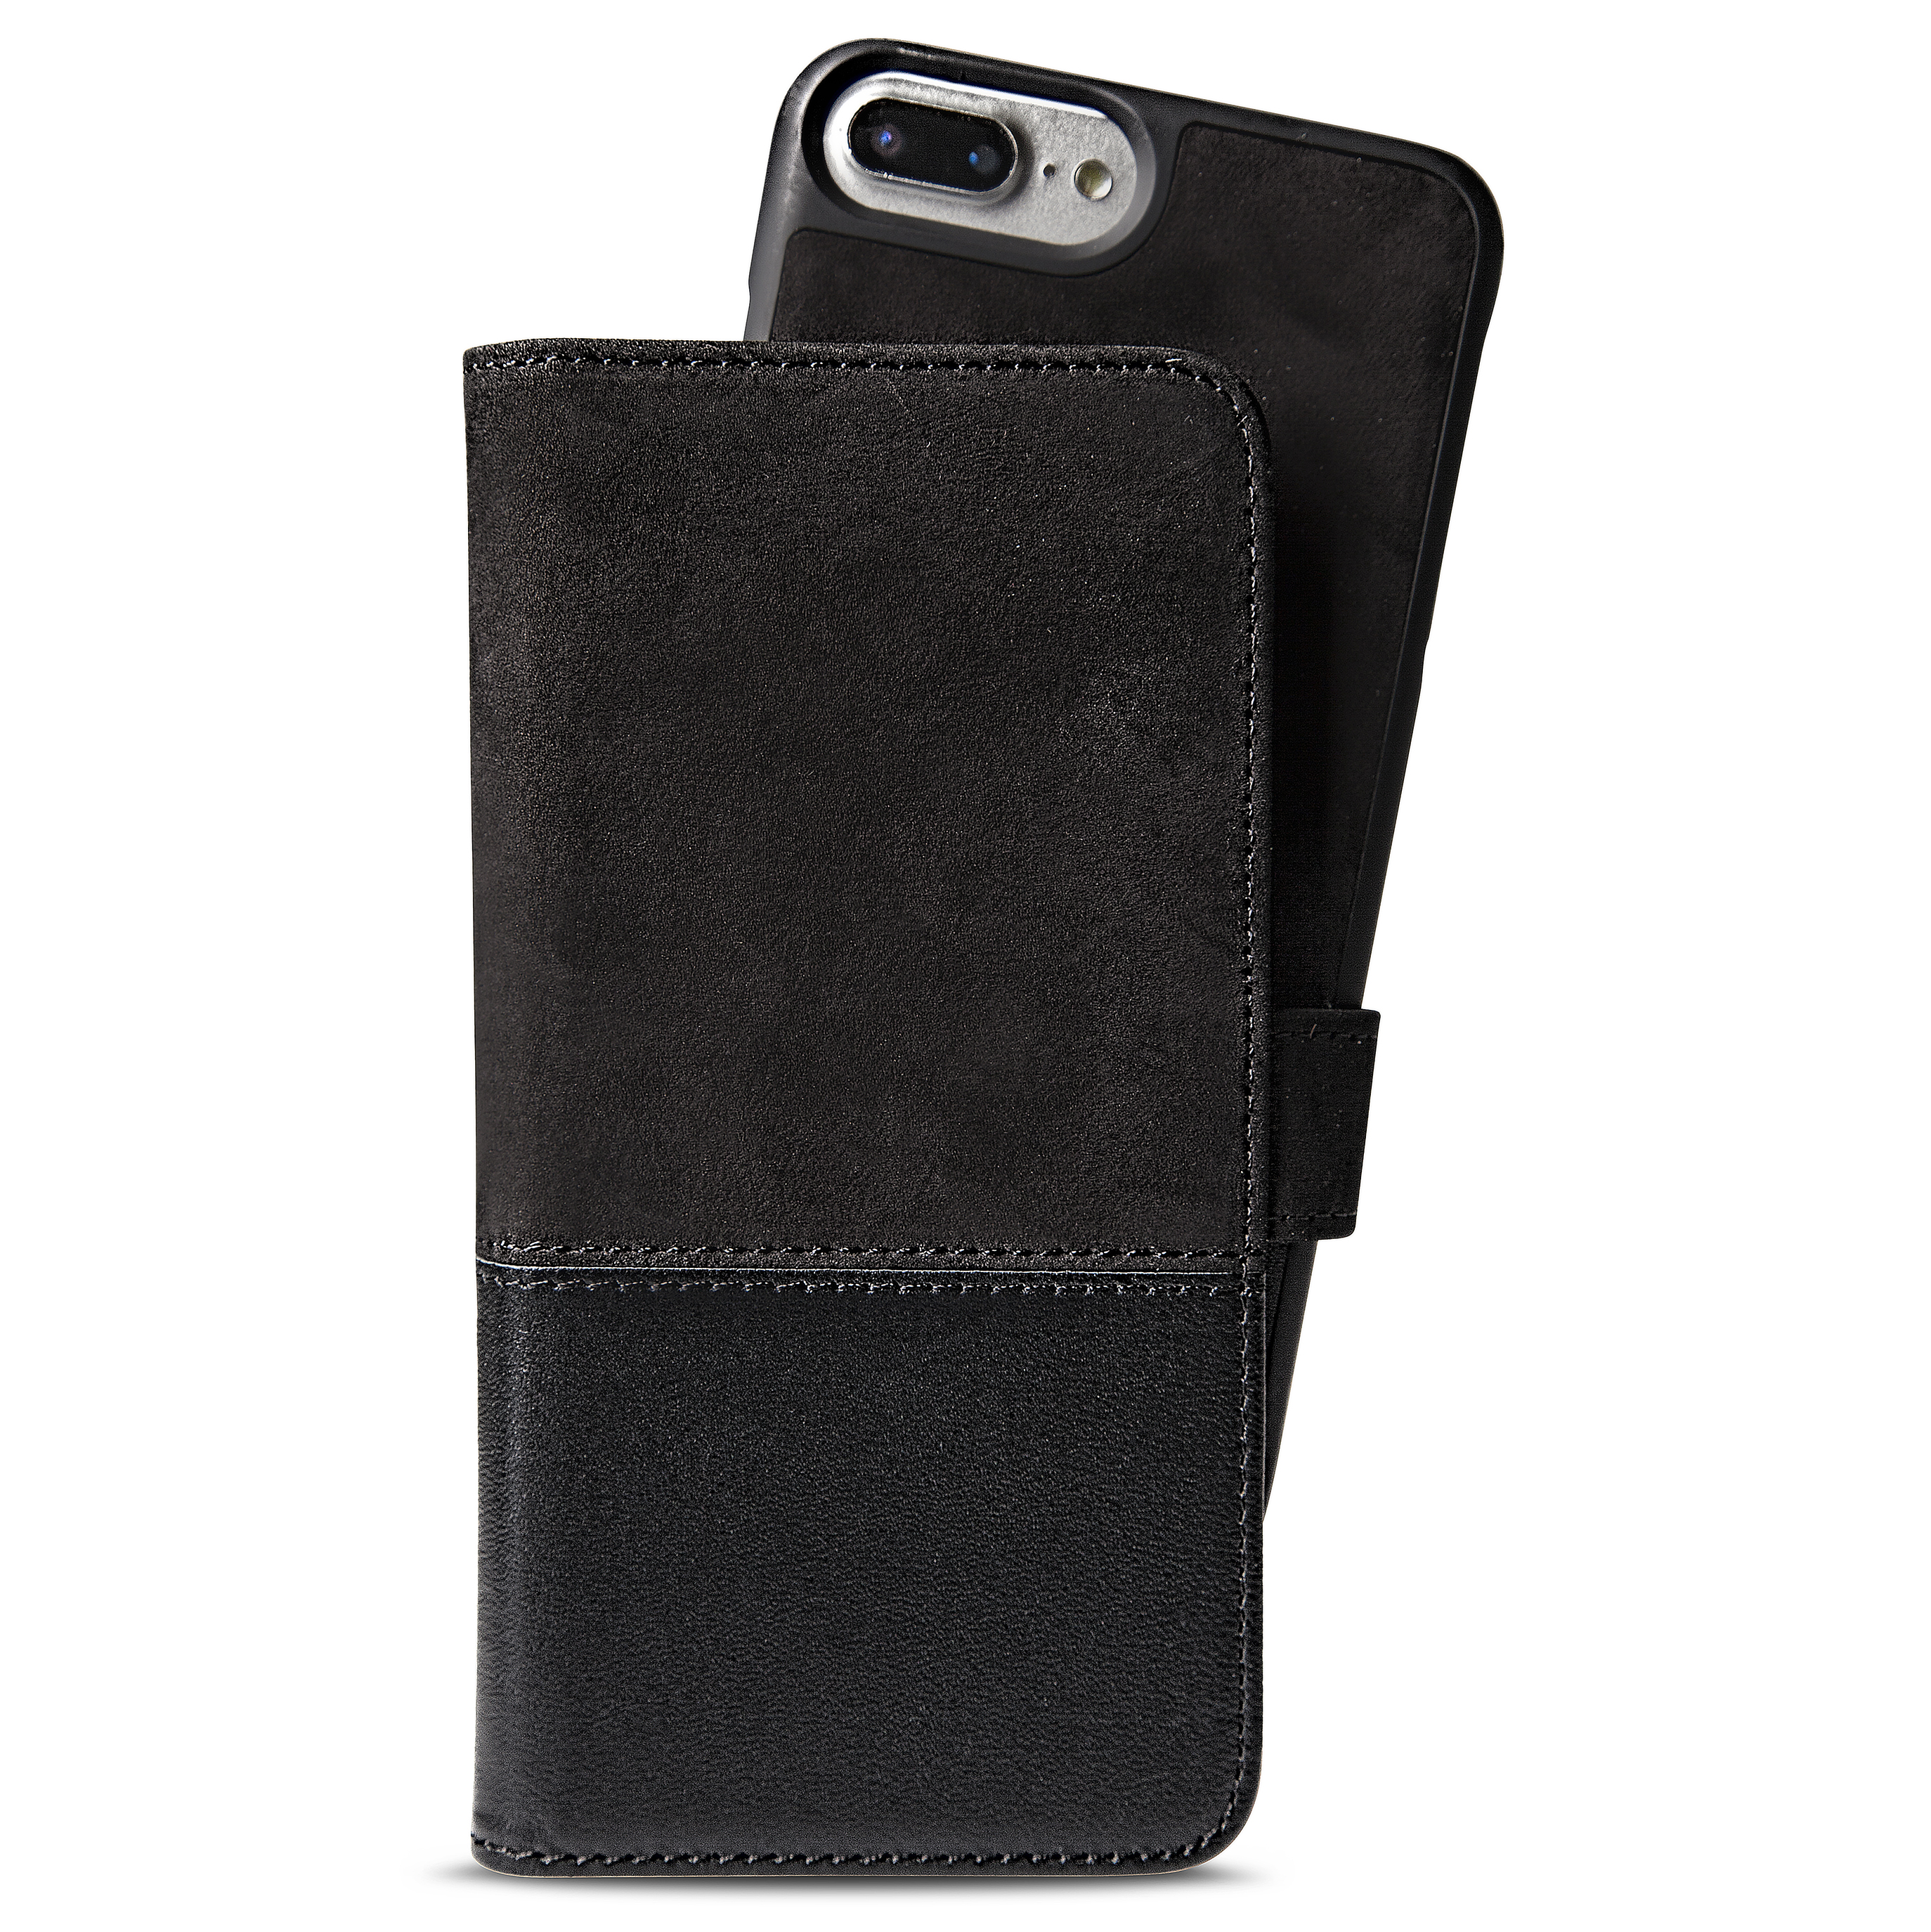 iPhone 8/7/6s/6 Plus, selected wallet magnetic leather/suede, black